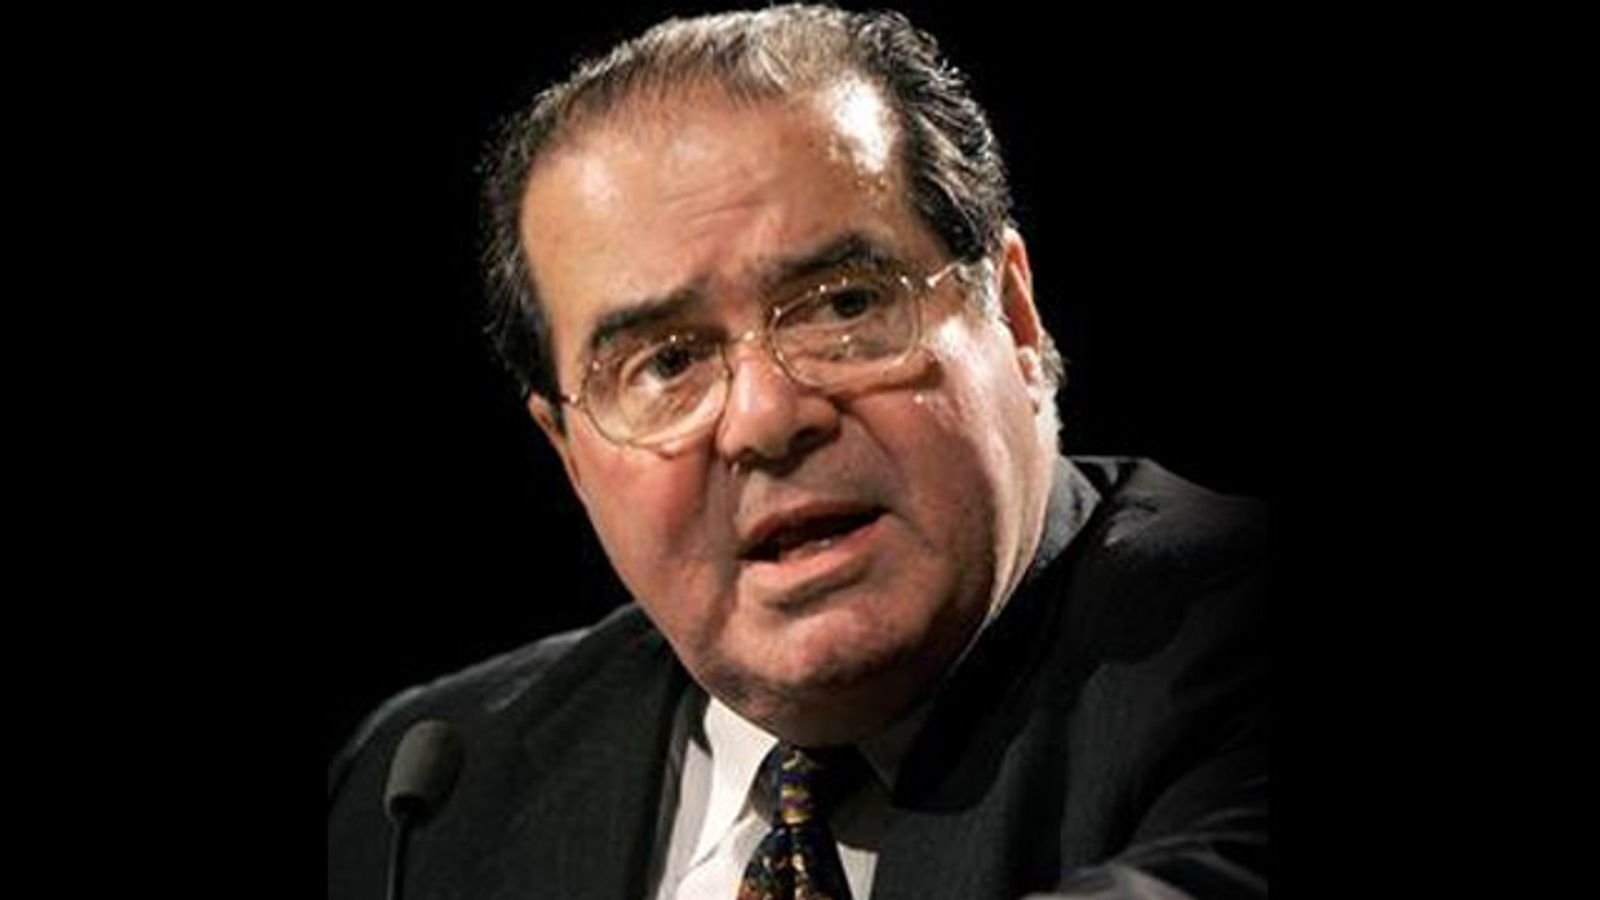 High Court's Most Sex-Negative Justice, Antonin Scalia, Dead At 79